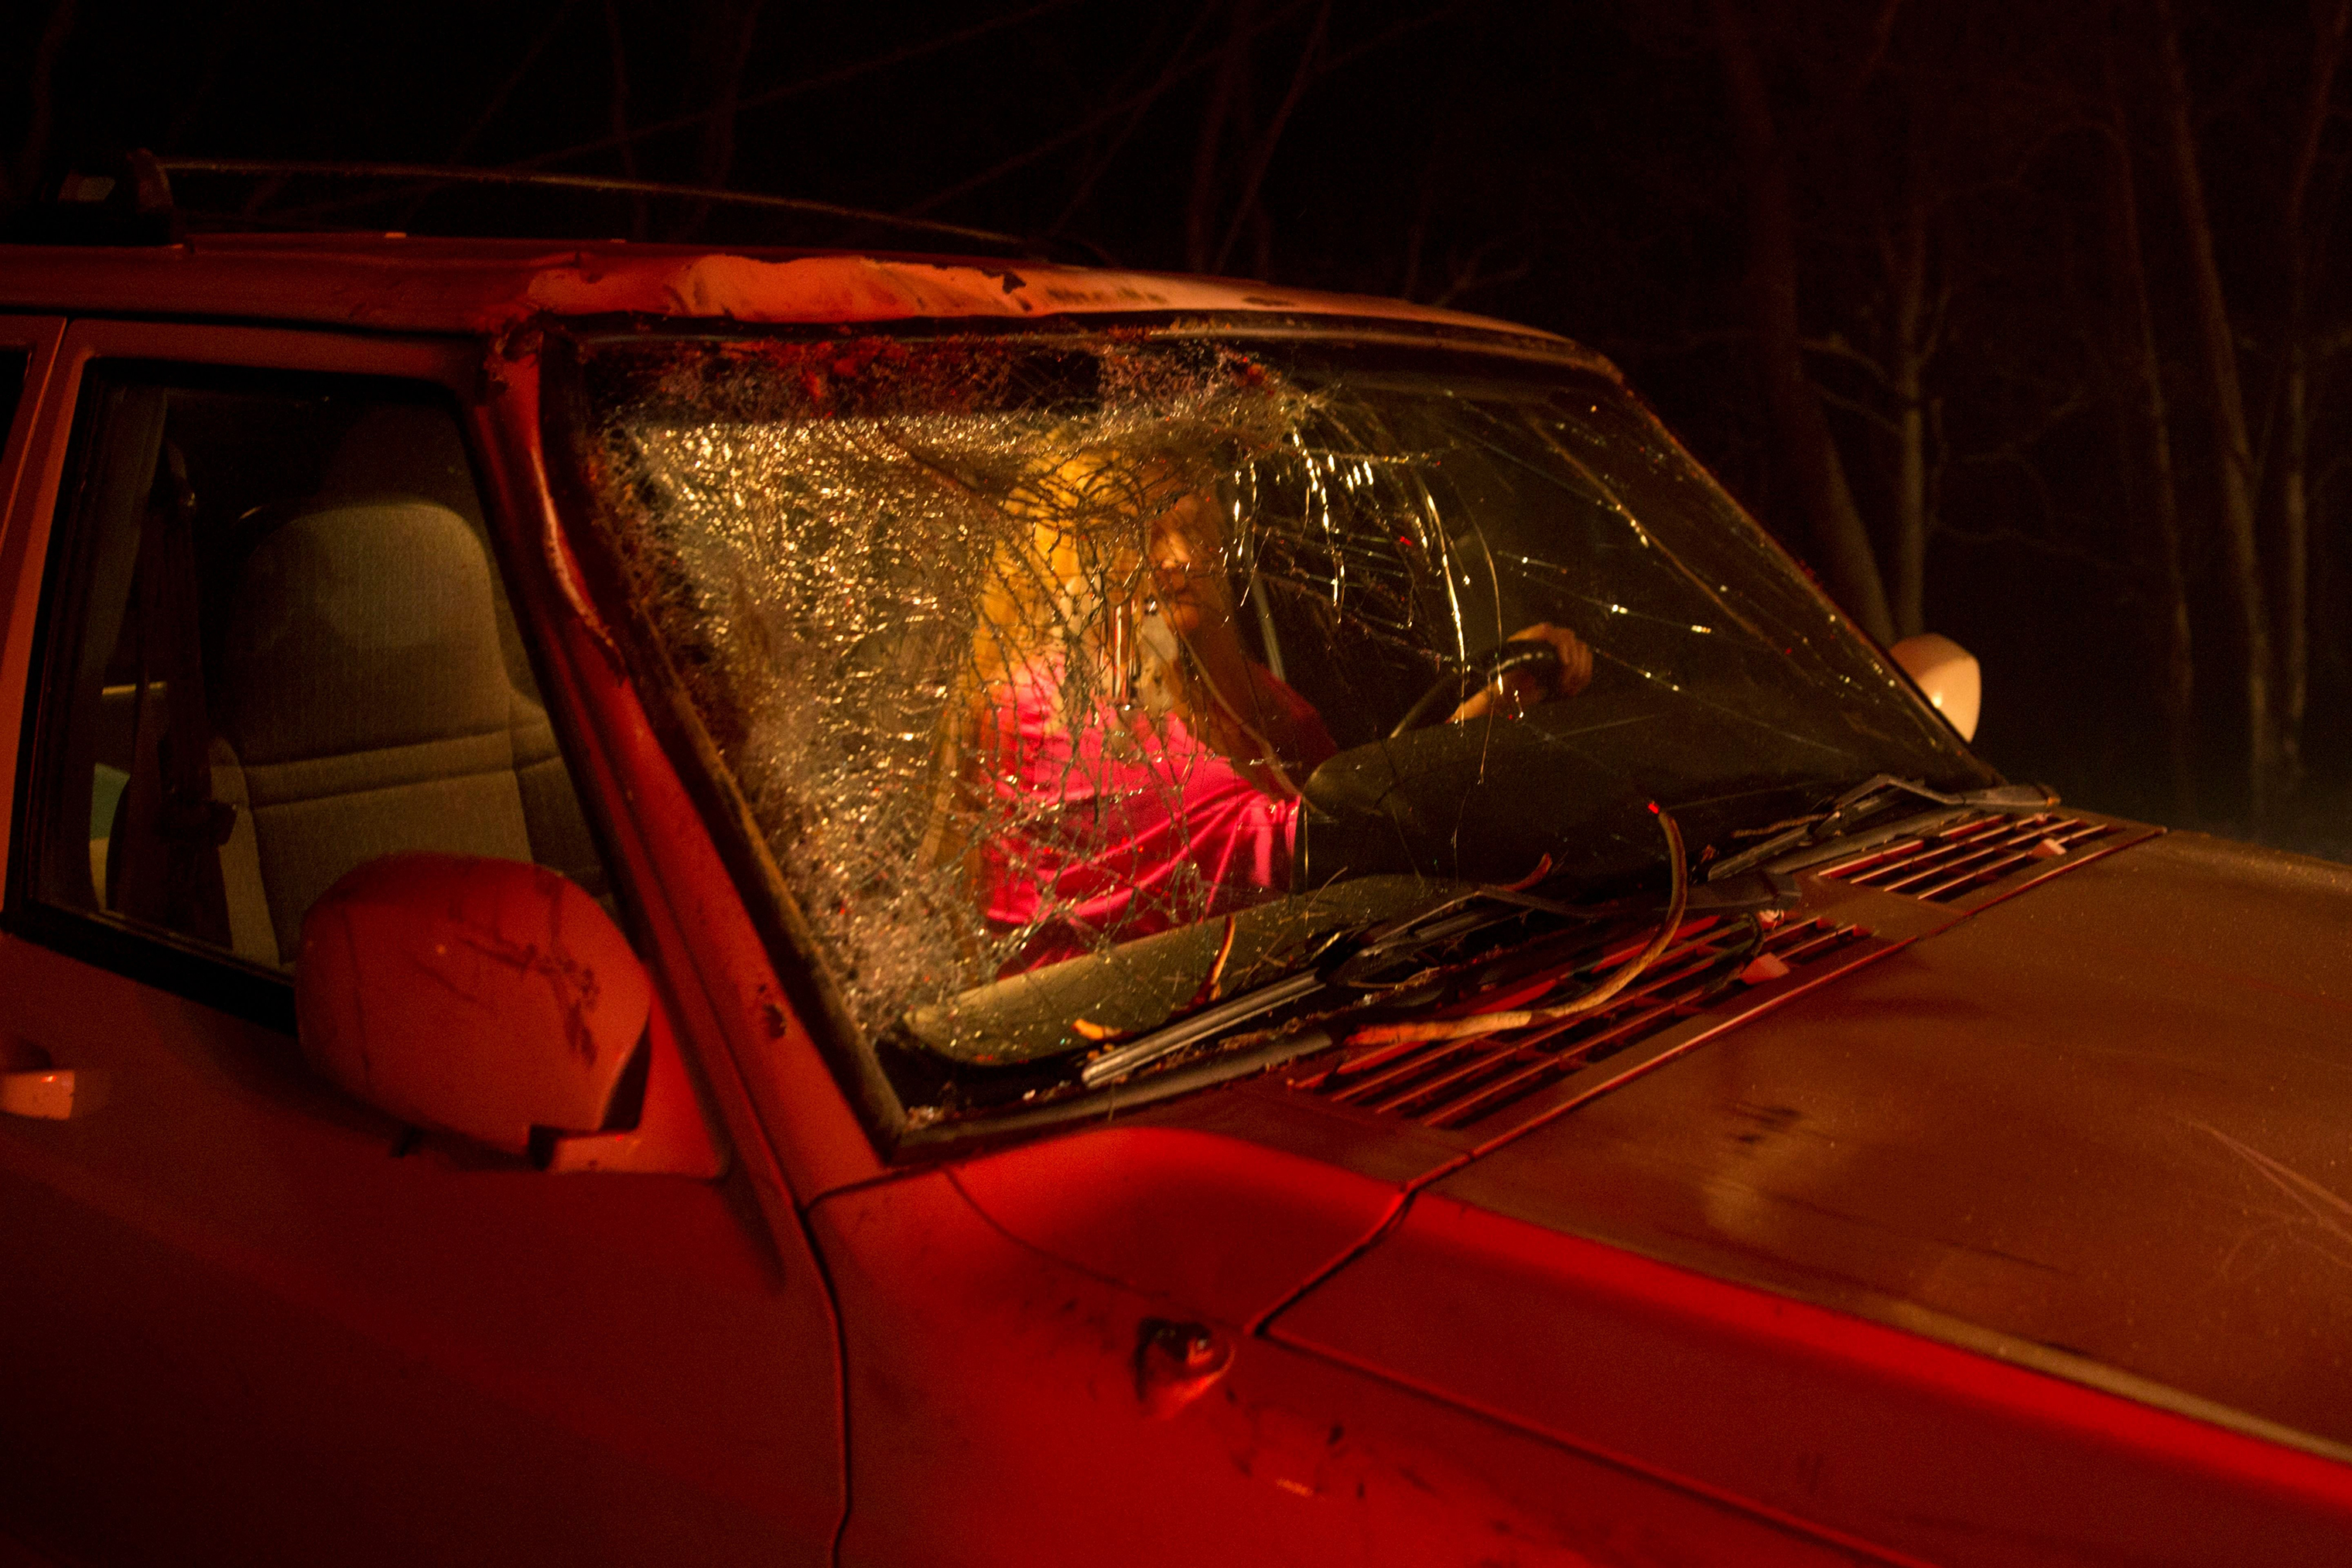 The unidentified driver who narrowly survived after a large tree fell on to the road and cracked the windshield during the Camp Fire, as it burned out of control through Paradise, Calif. on Nov. 8. (Peter Dasilva—EPA-EFE/Shutterstock)